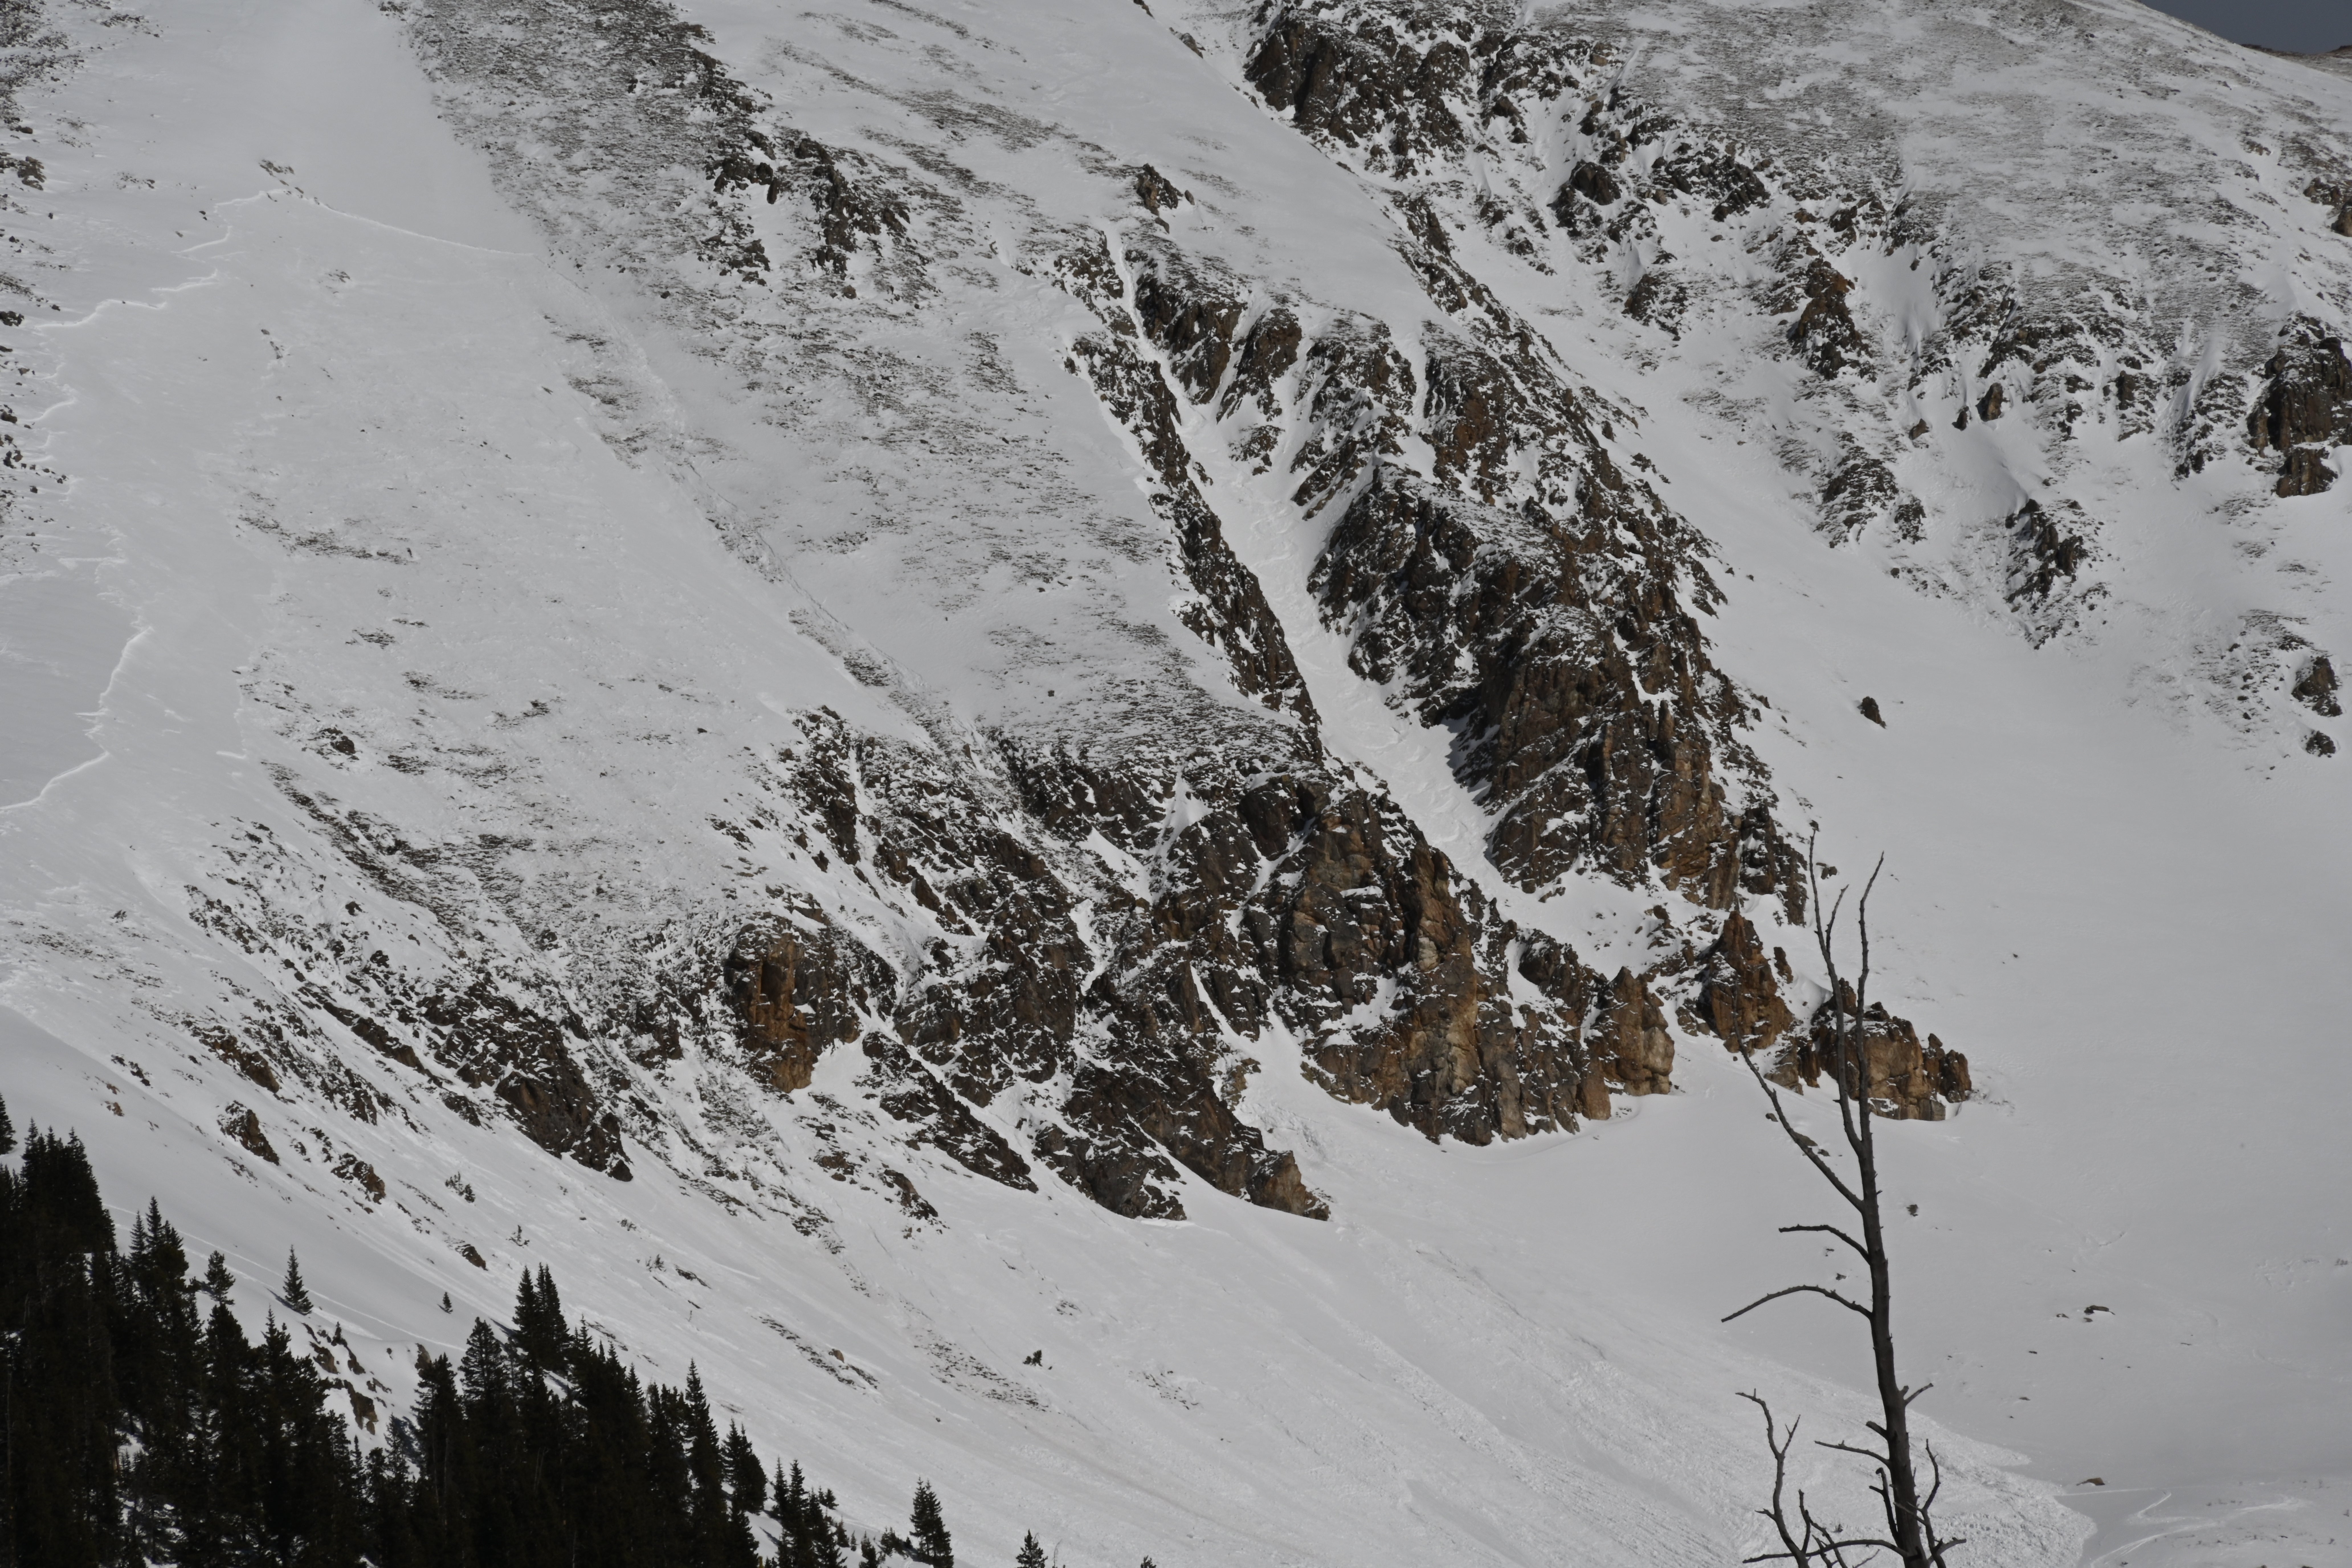 The avalanche, pictured, happened on Sunday near Loveland Pass in Summit County, Colorado